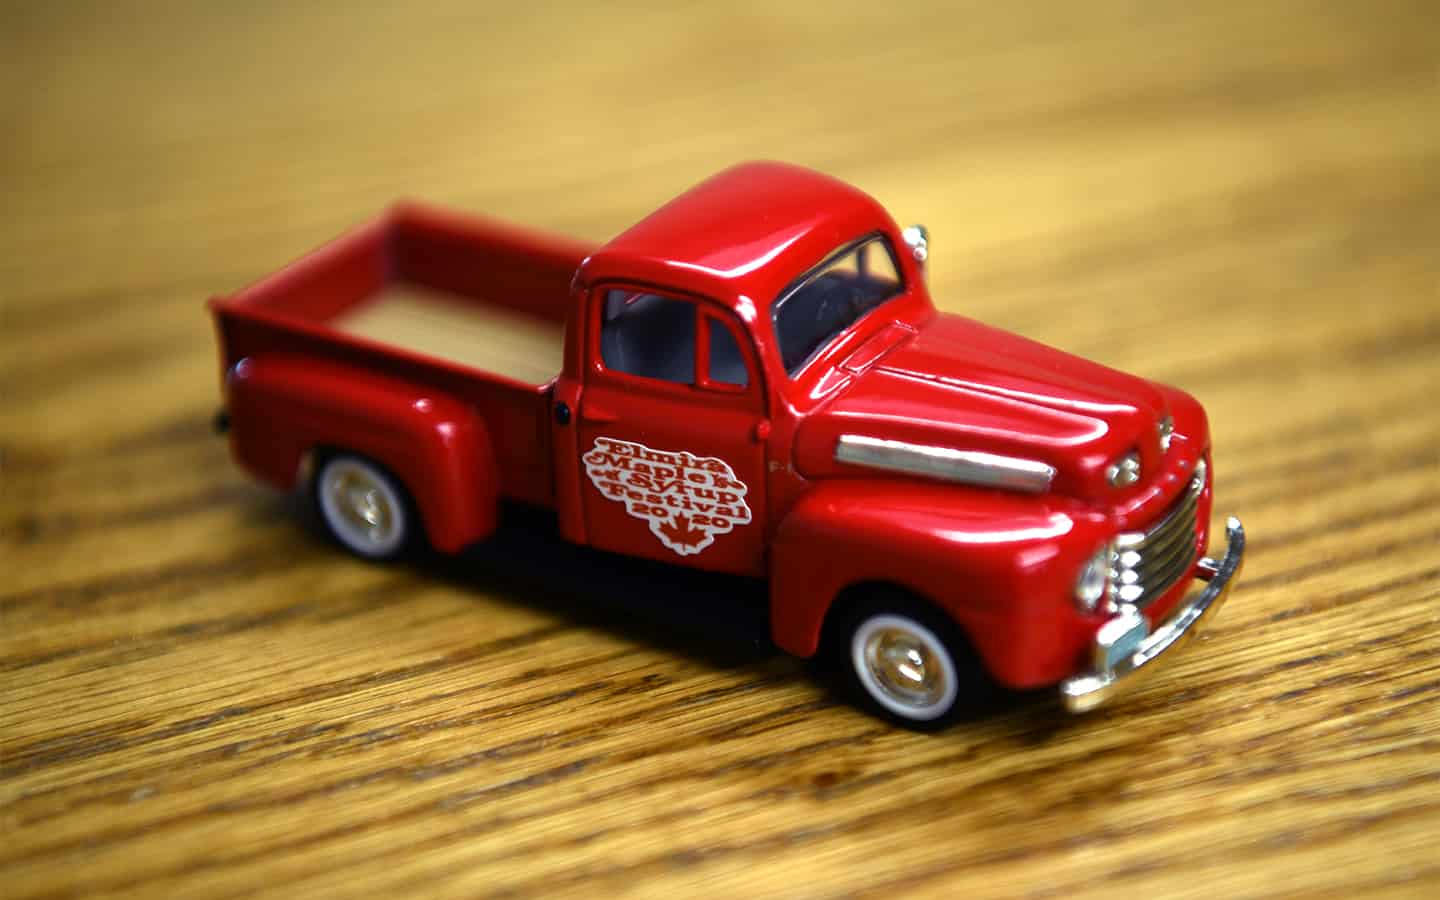                      EMSF collectible truck will still be sold in fundraising effort                             
                     